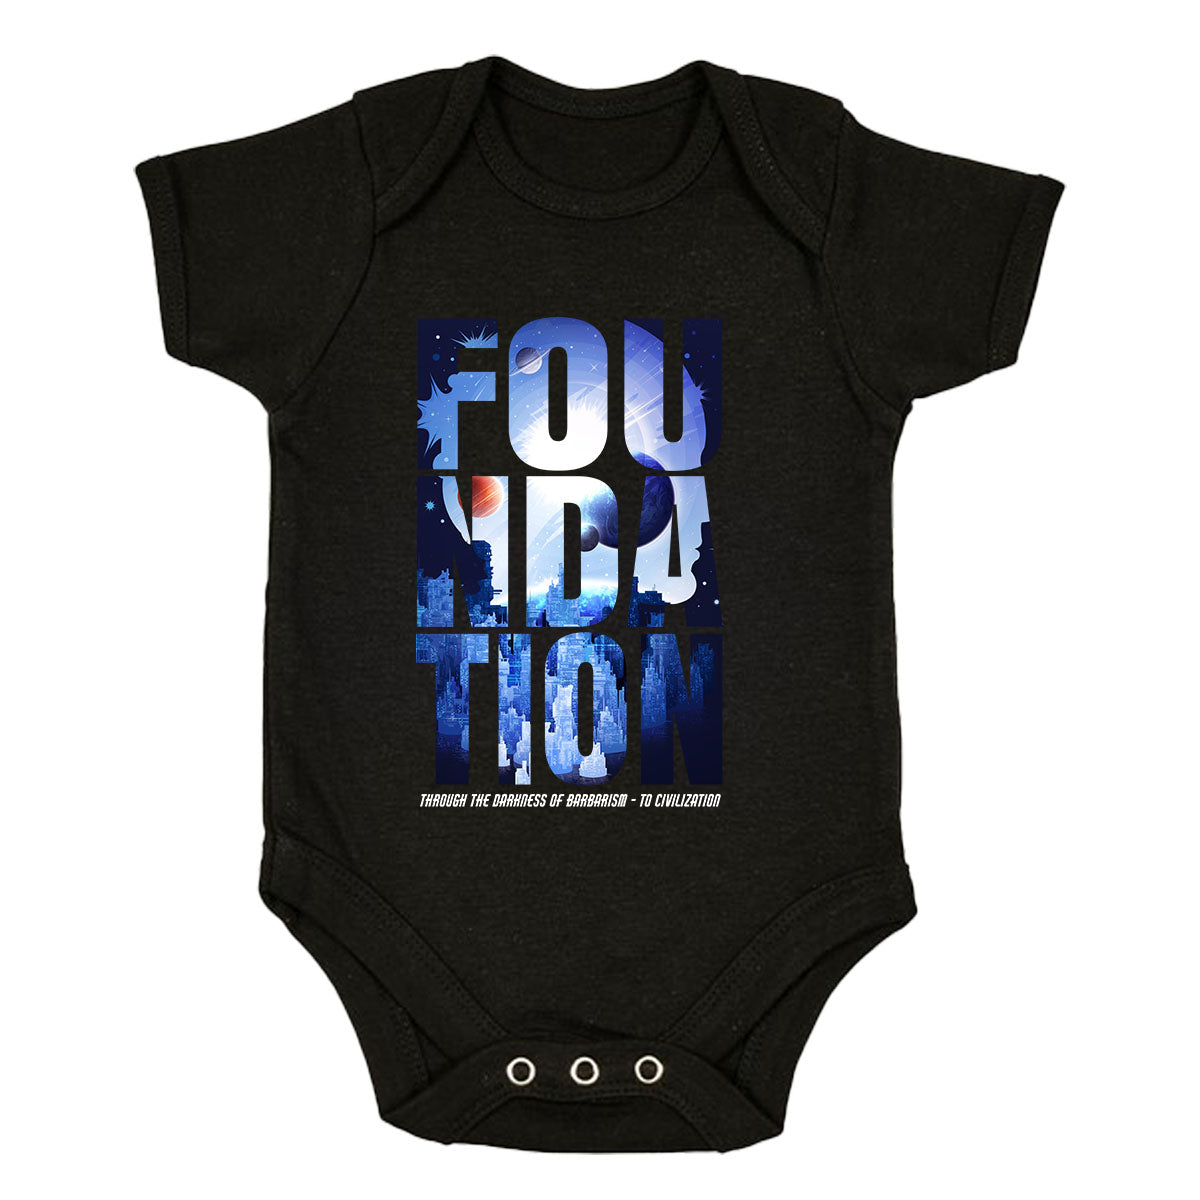 New Isaac Asimov T-Shirt Foundation One Robot Science Fiction TV series Movie Baby & Toddler Body Suit - Kuzi Tees